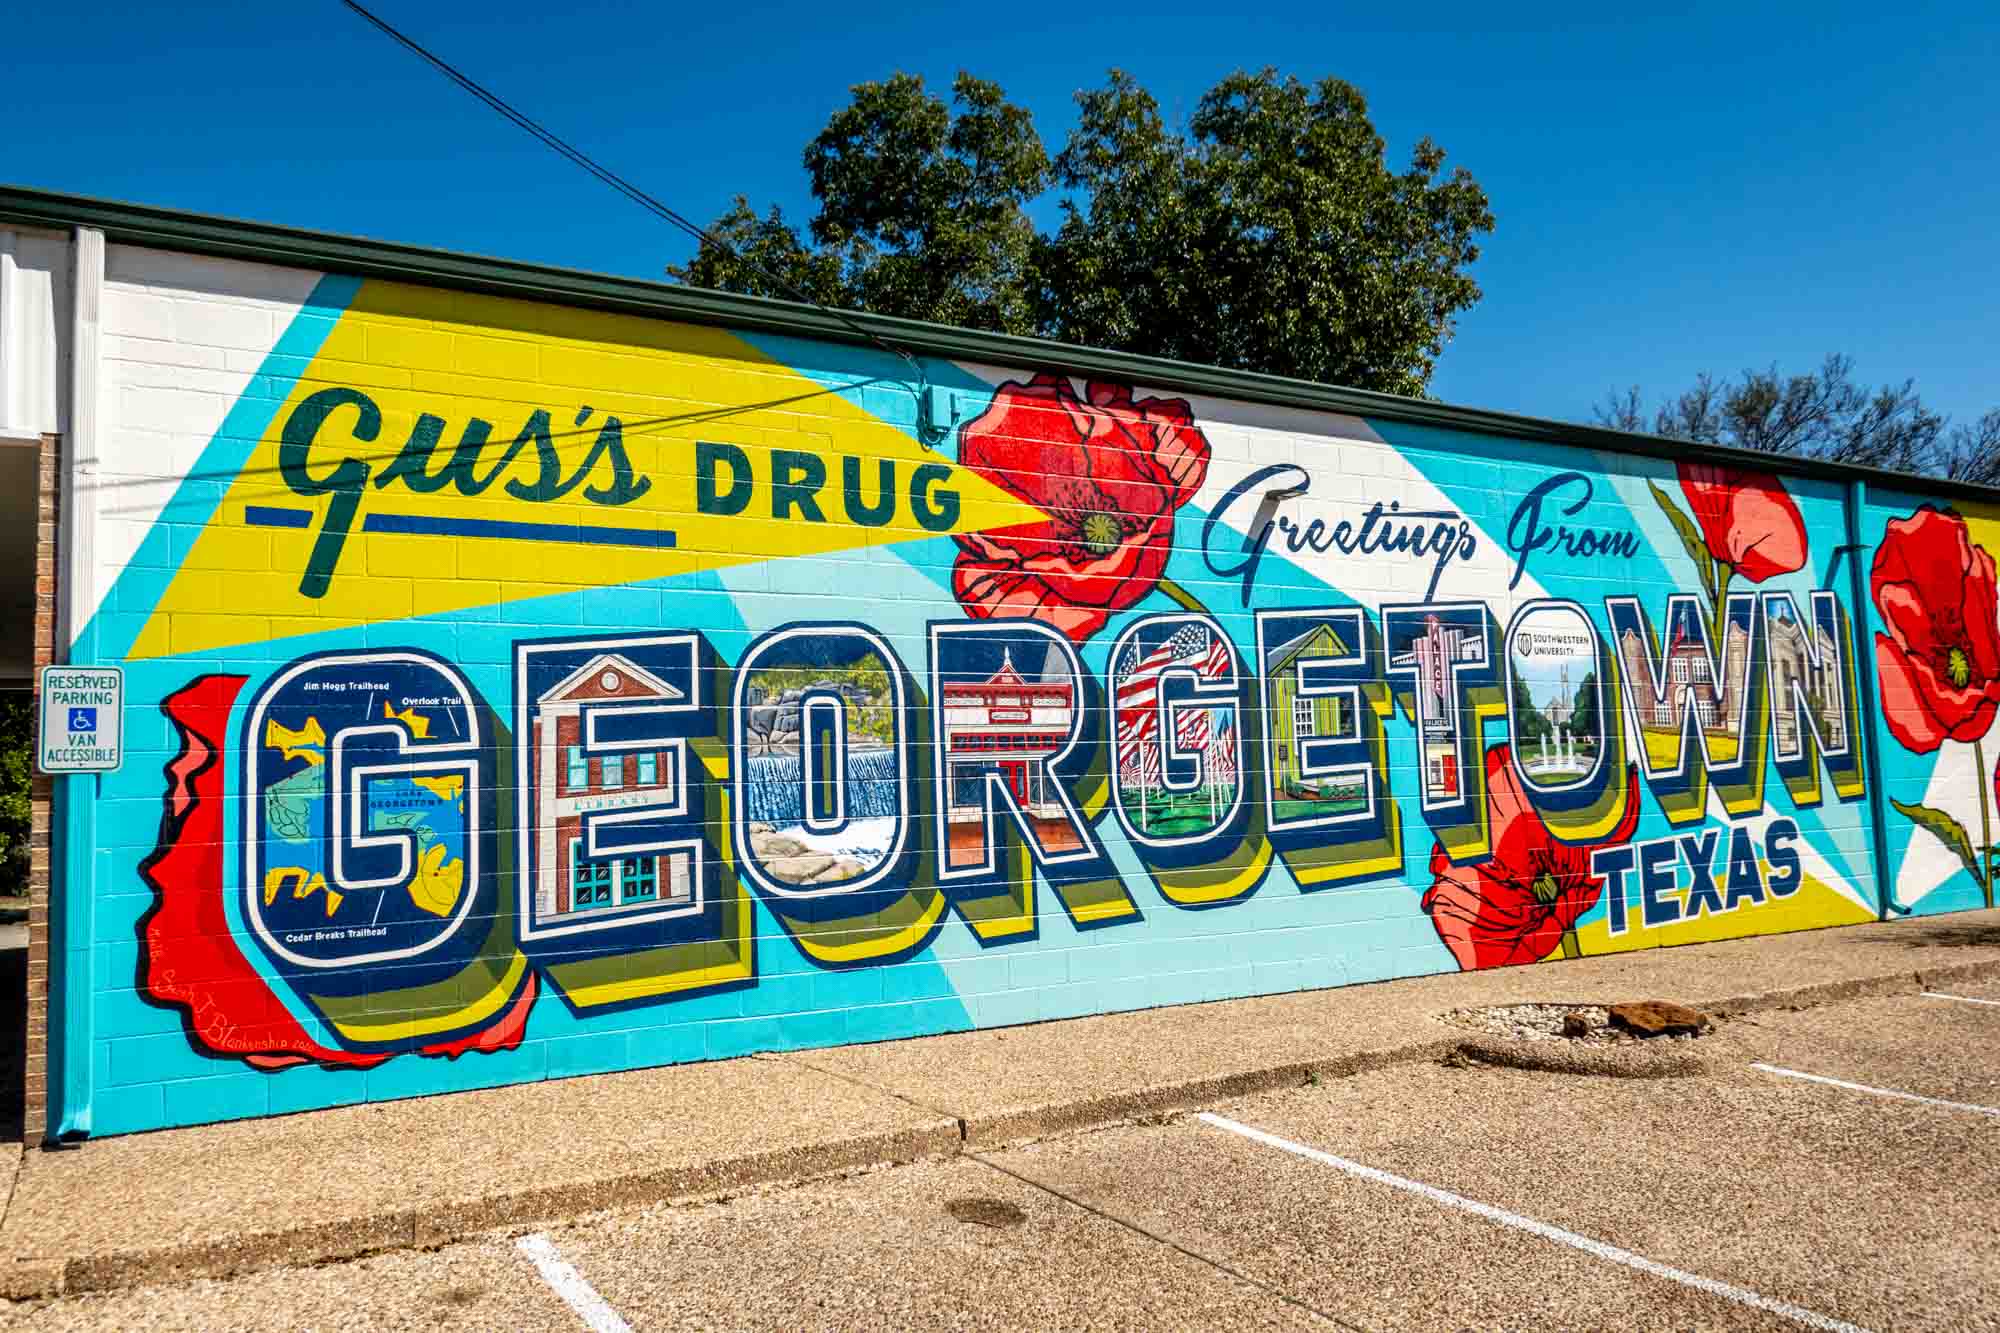 Mural with red poppies: 
Gus's Drug: Greetings From Georgetown, Texas"